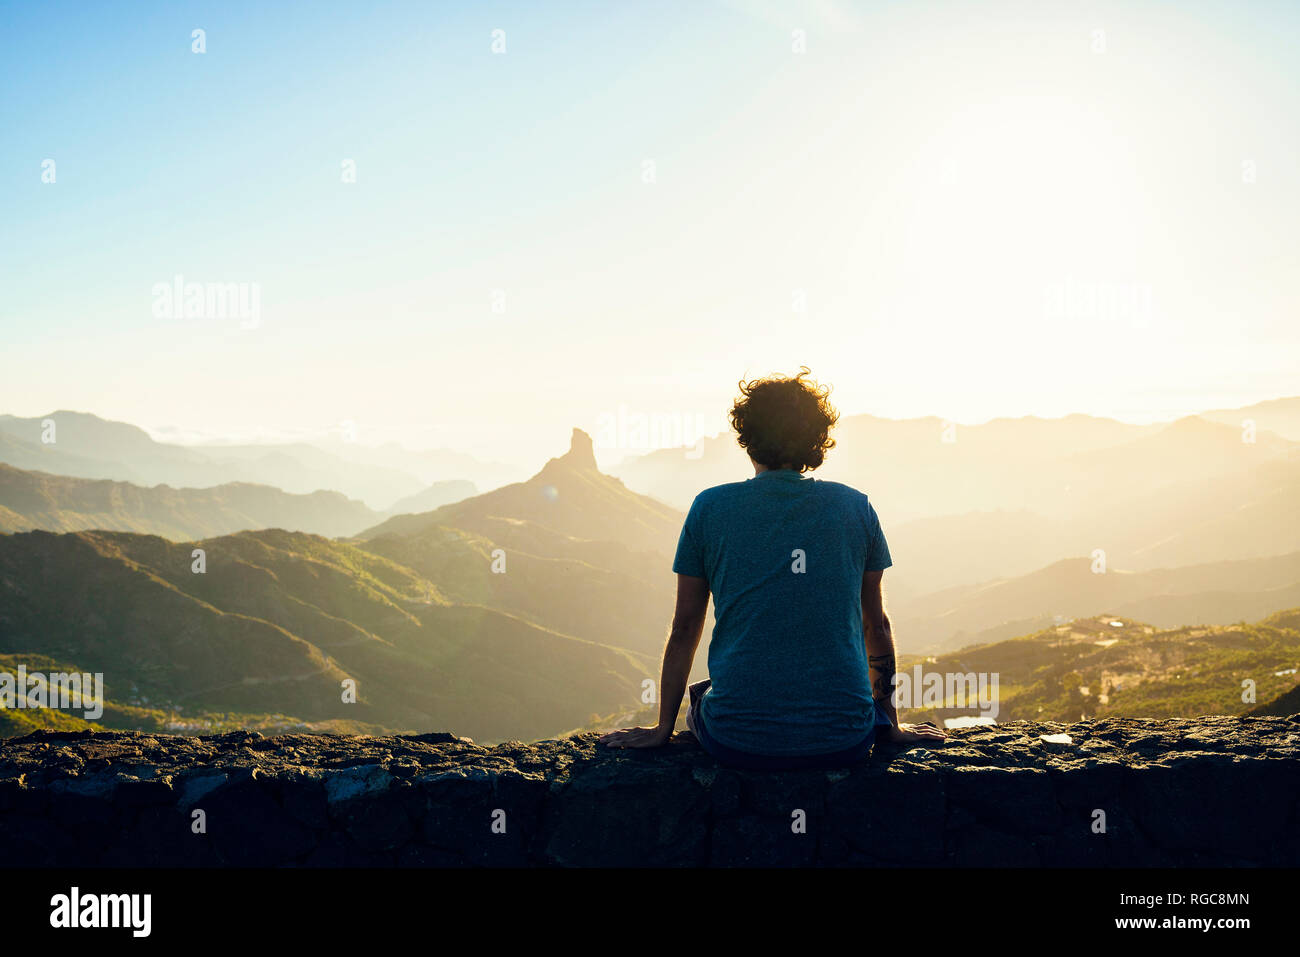 Spain, Canary Islands, Gran Canaria, back view of man watching mountain landscape Stock Photo